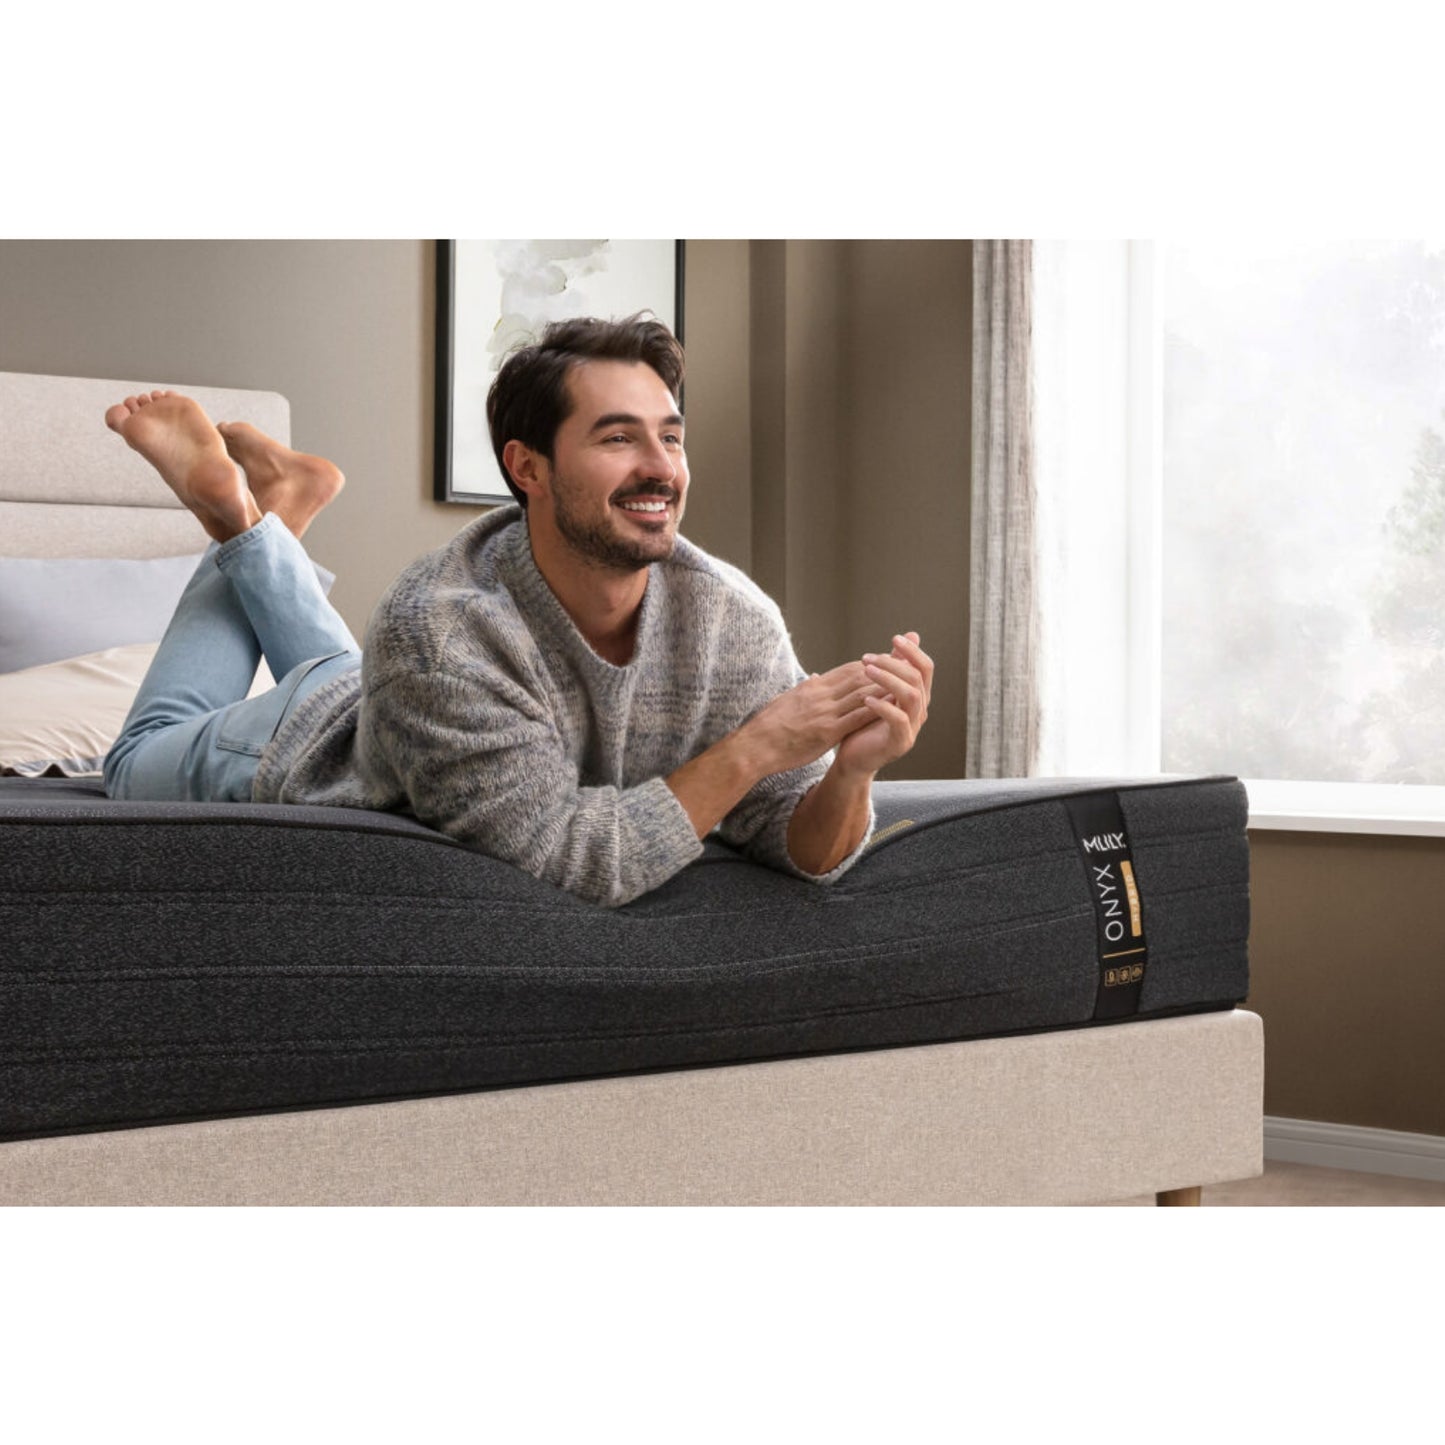 ONYX 12" Hybrid Mattress With Copper Infused Memory Foam Inside Of A Bedroom With A Man Lying On His Stomach